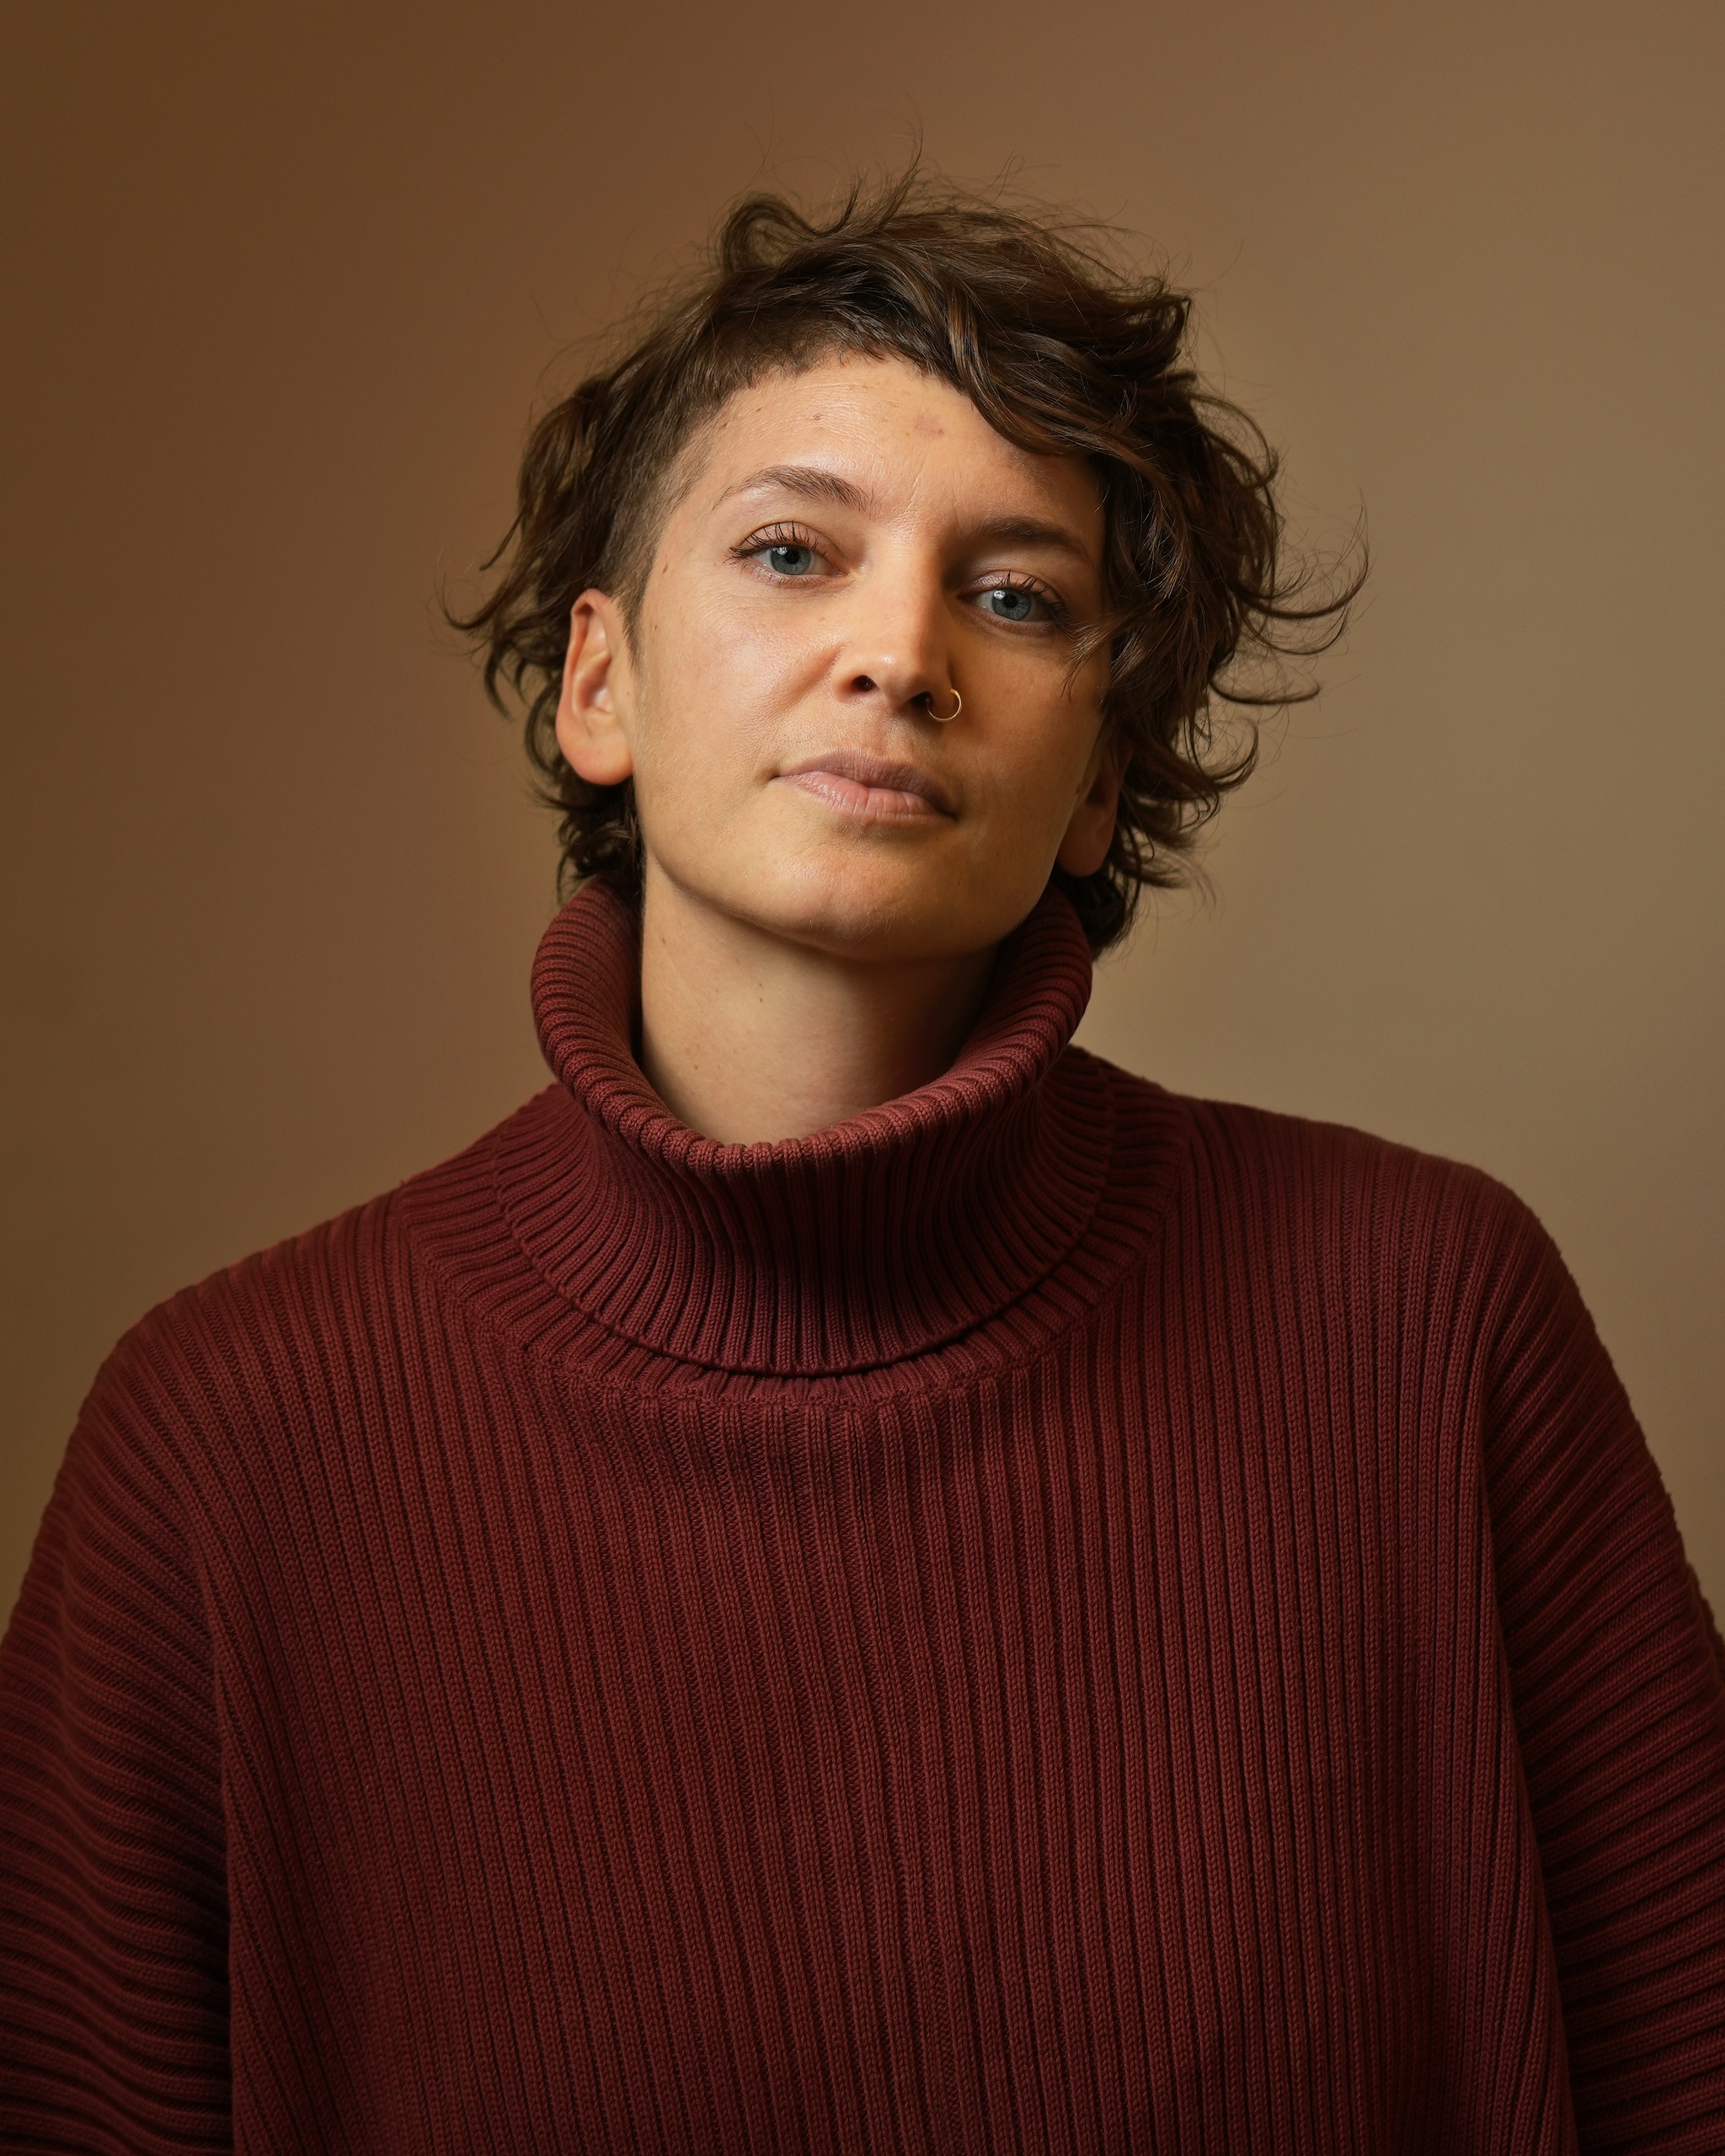 A portrait of Zoe Rabinowitz against a neutral brown background. Zoe wears a wine-red turtleneck sweater and tilts her head back slightly, looking directly at us. 